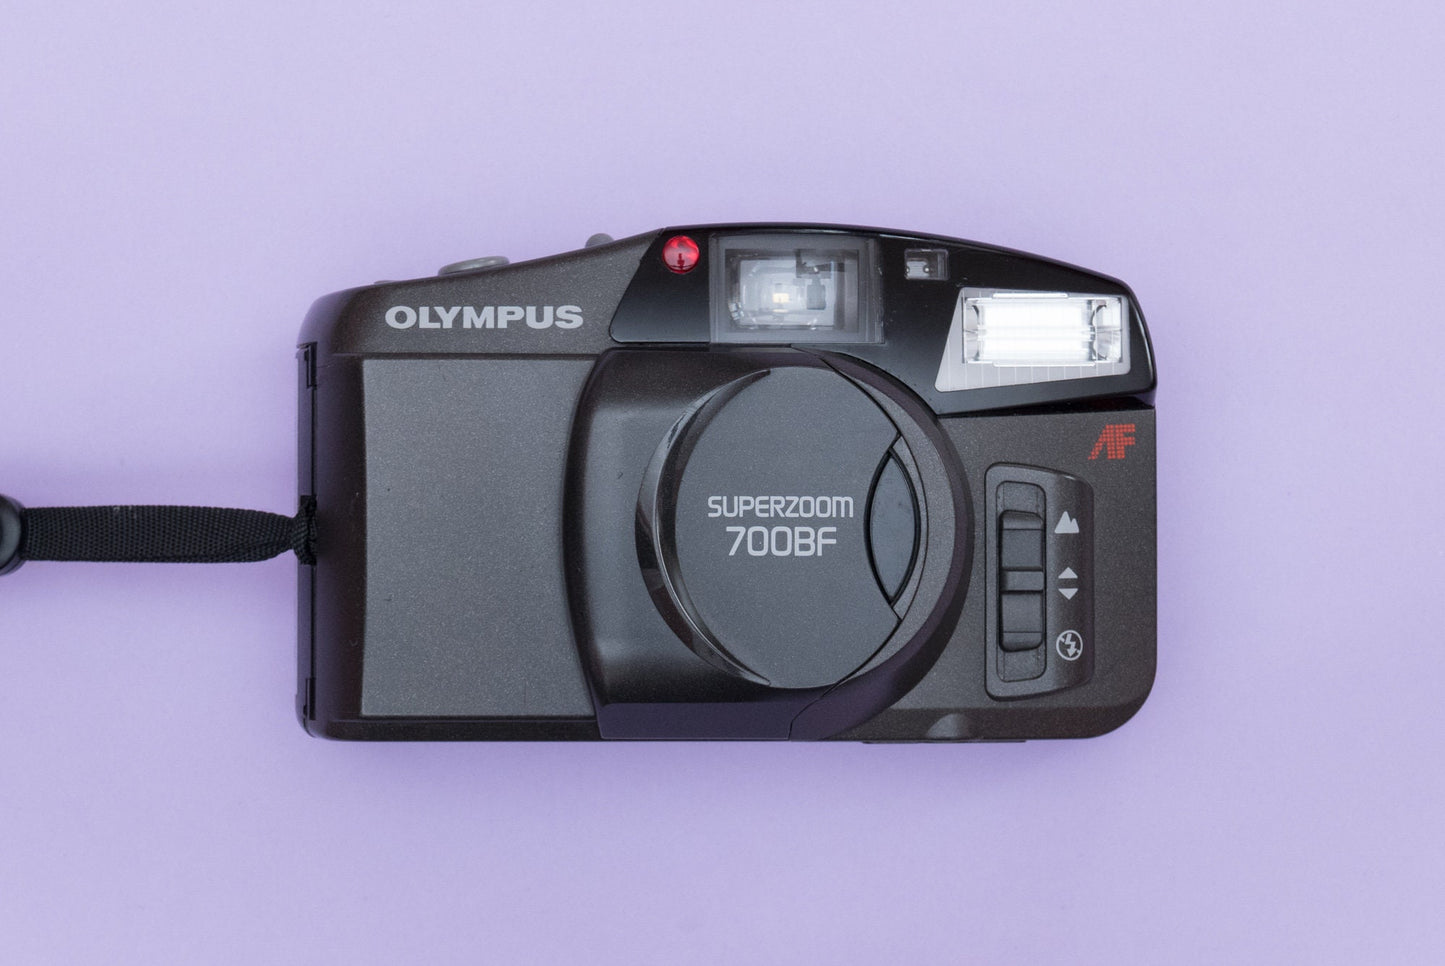 Olympus Superzoom 700 BF 35mm Point and Shoot Compact Film Camera